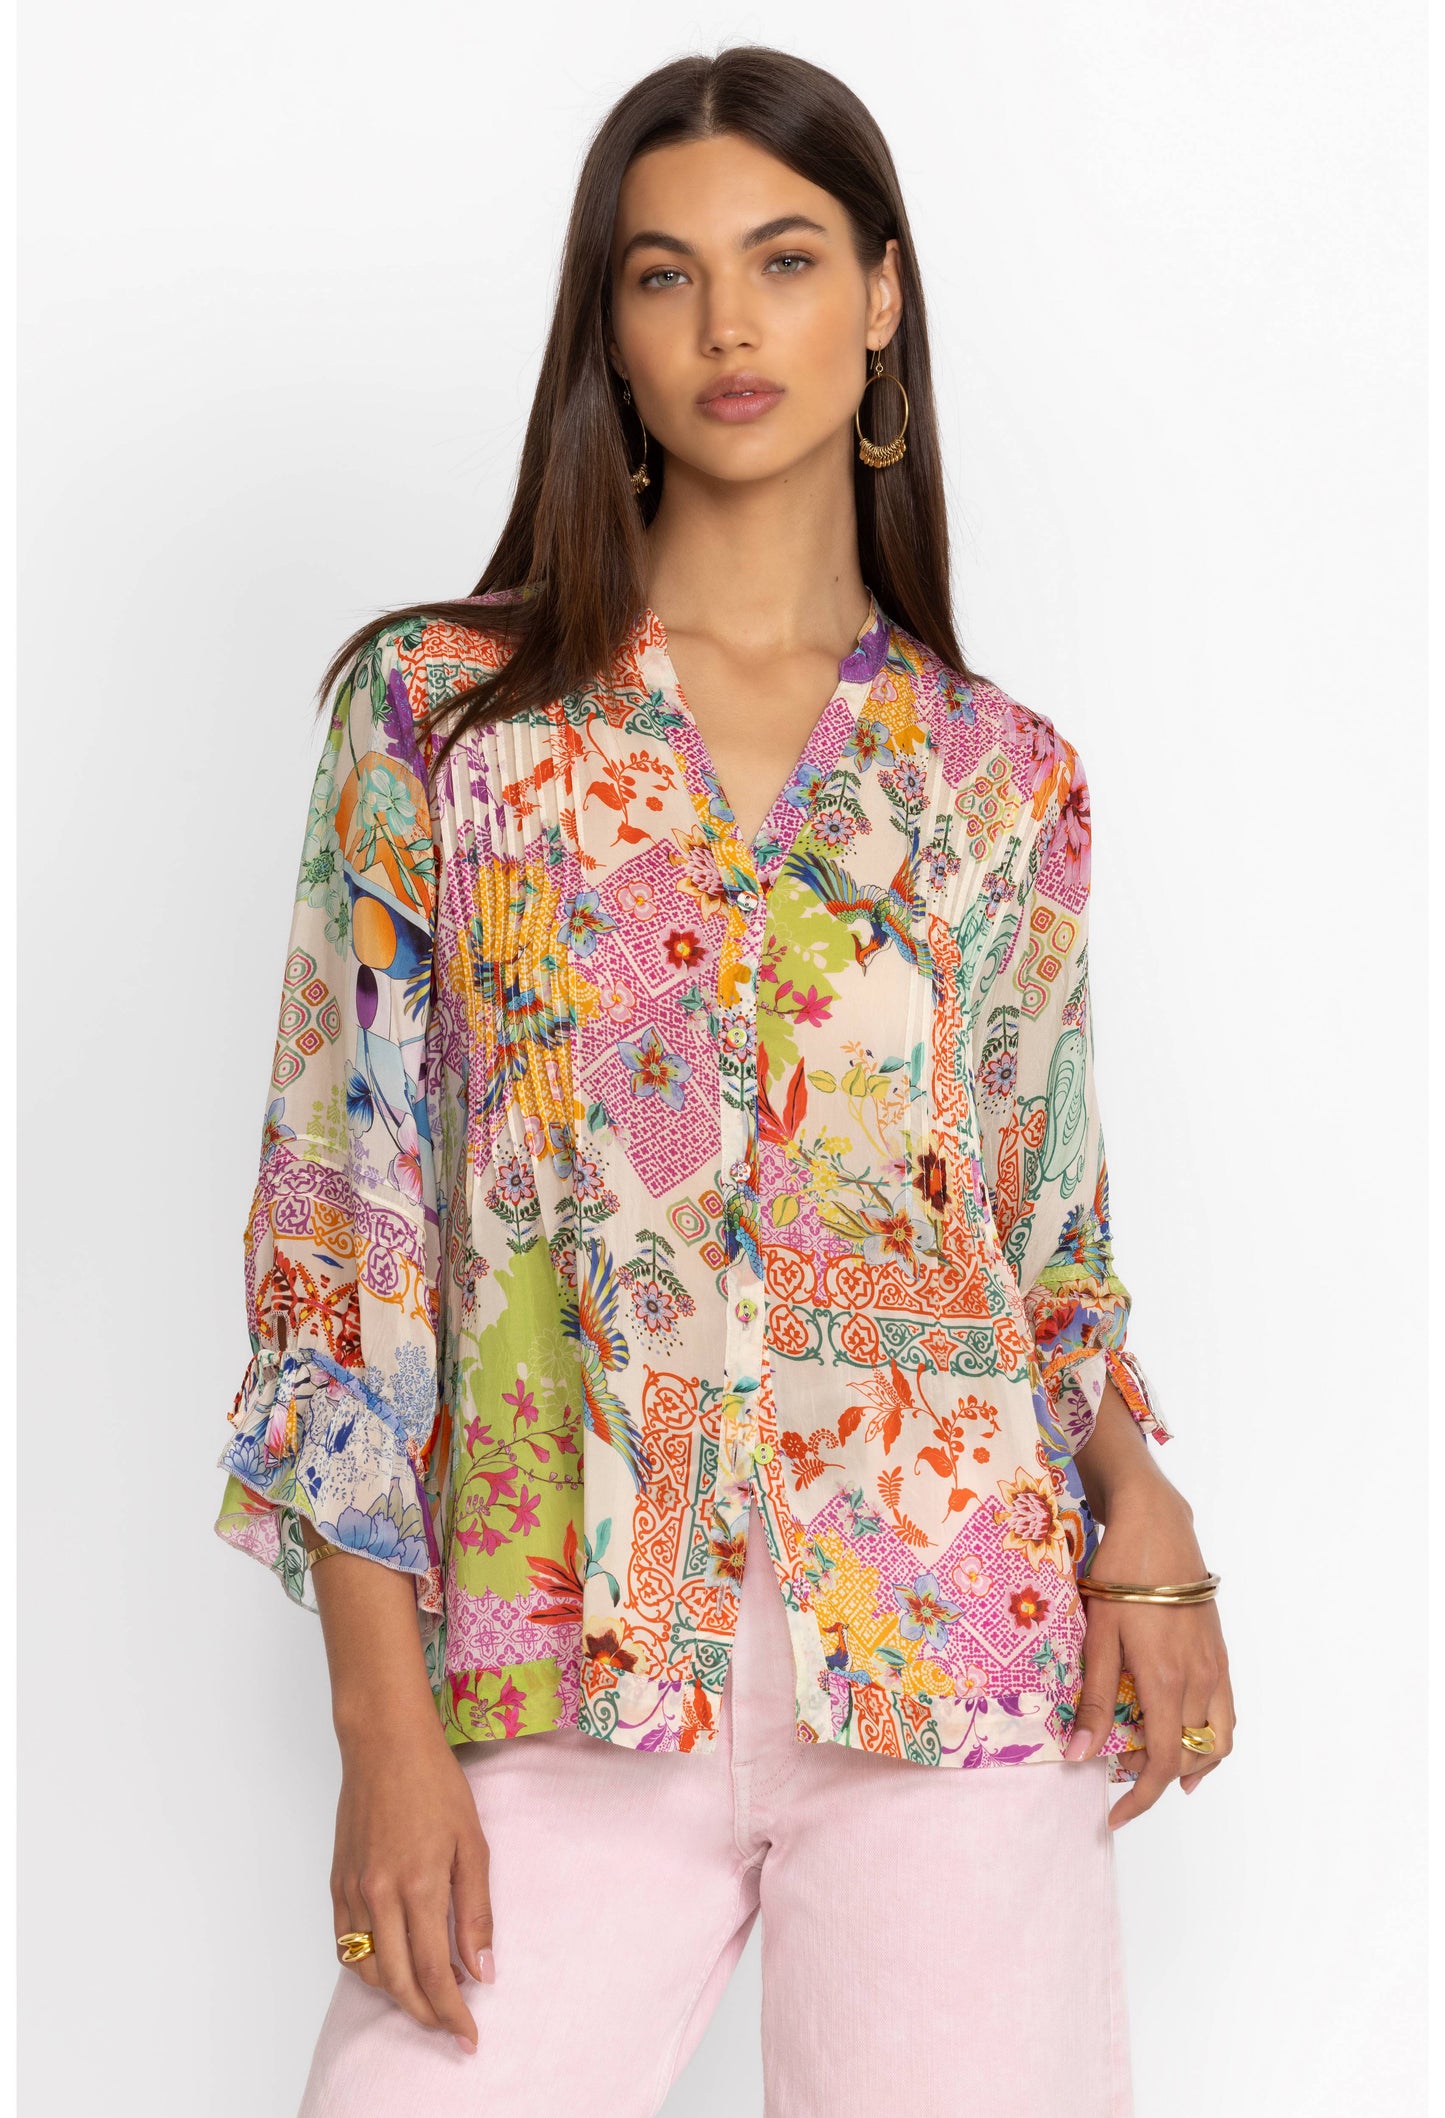 Johnny Was Vacanza Blouse-McDreamer Print